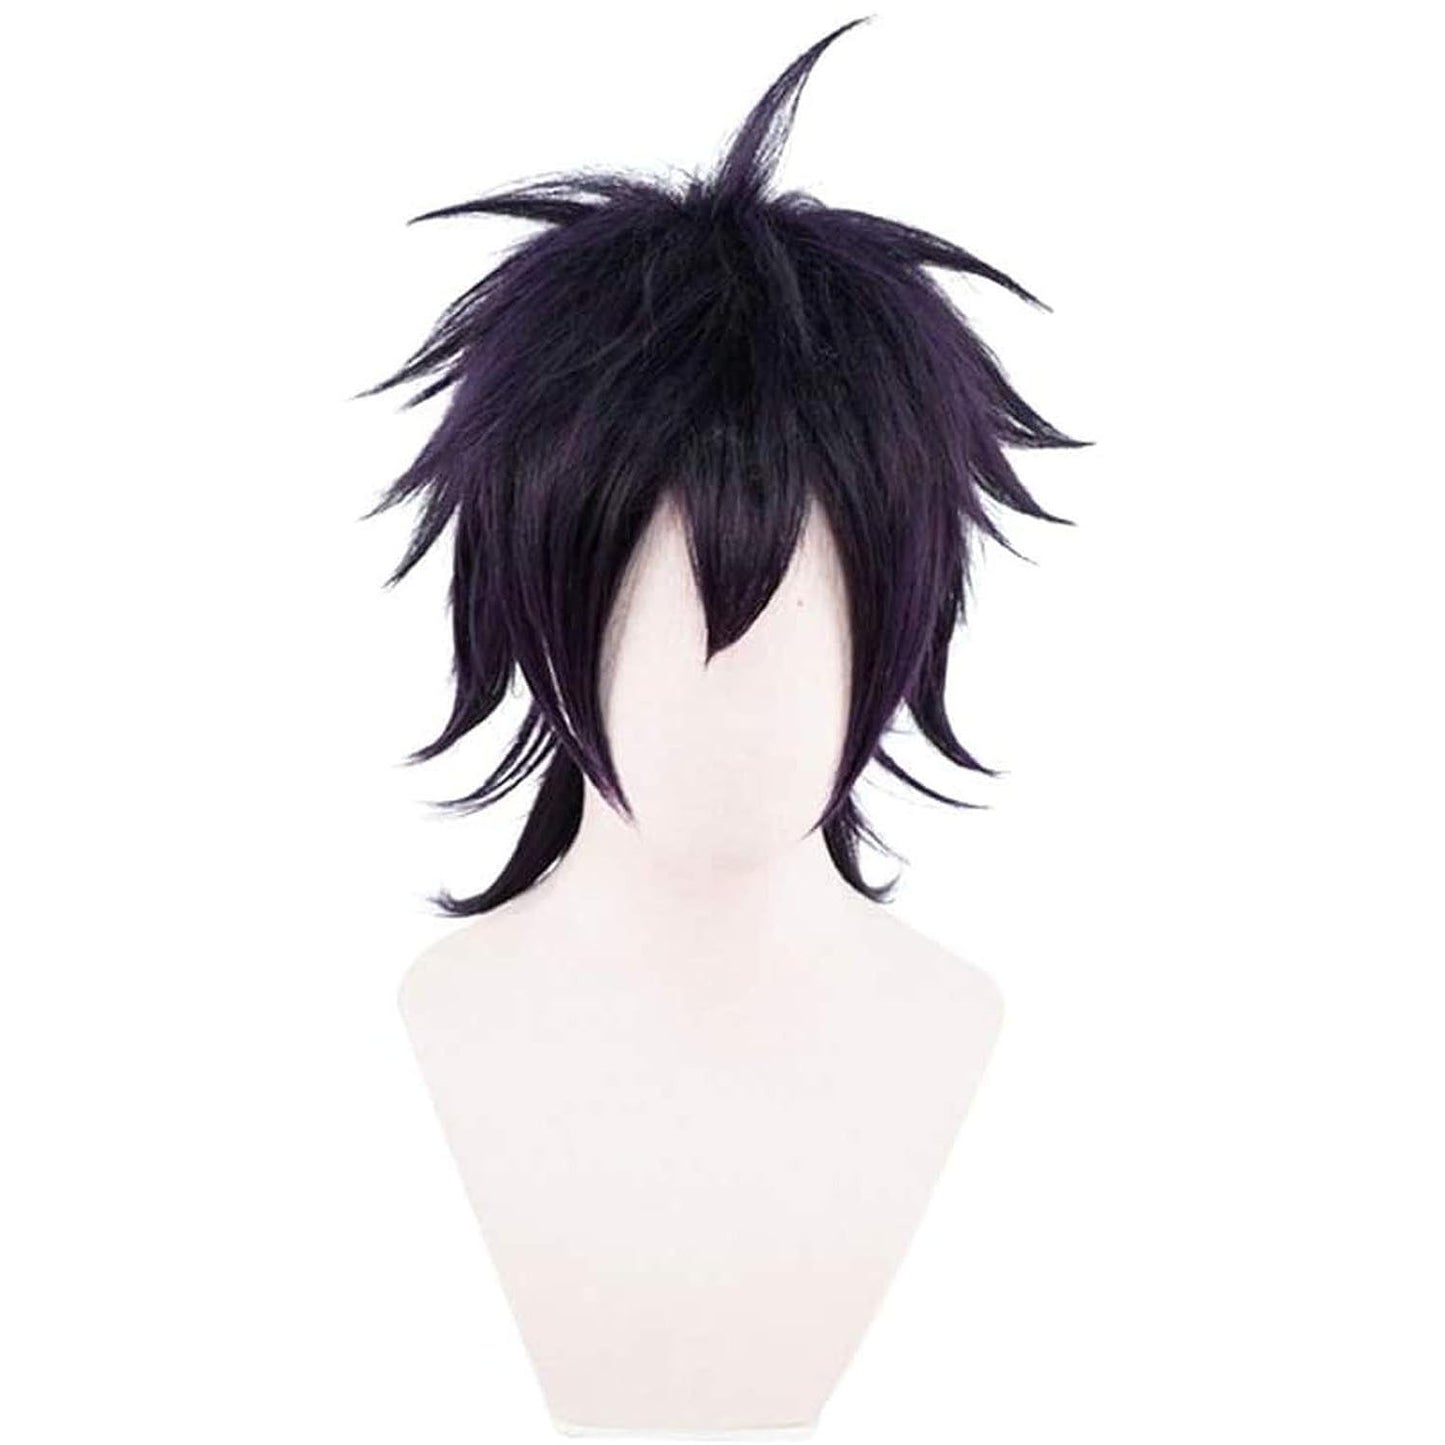 Transform into Narancia Ghirga: Get the Perfect Cosplay Wig from Morojowig!